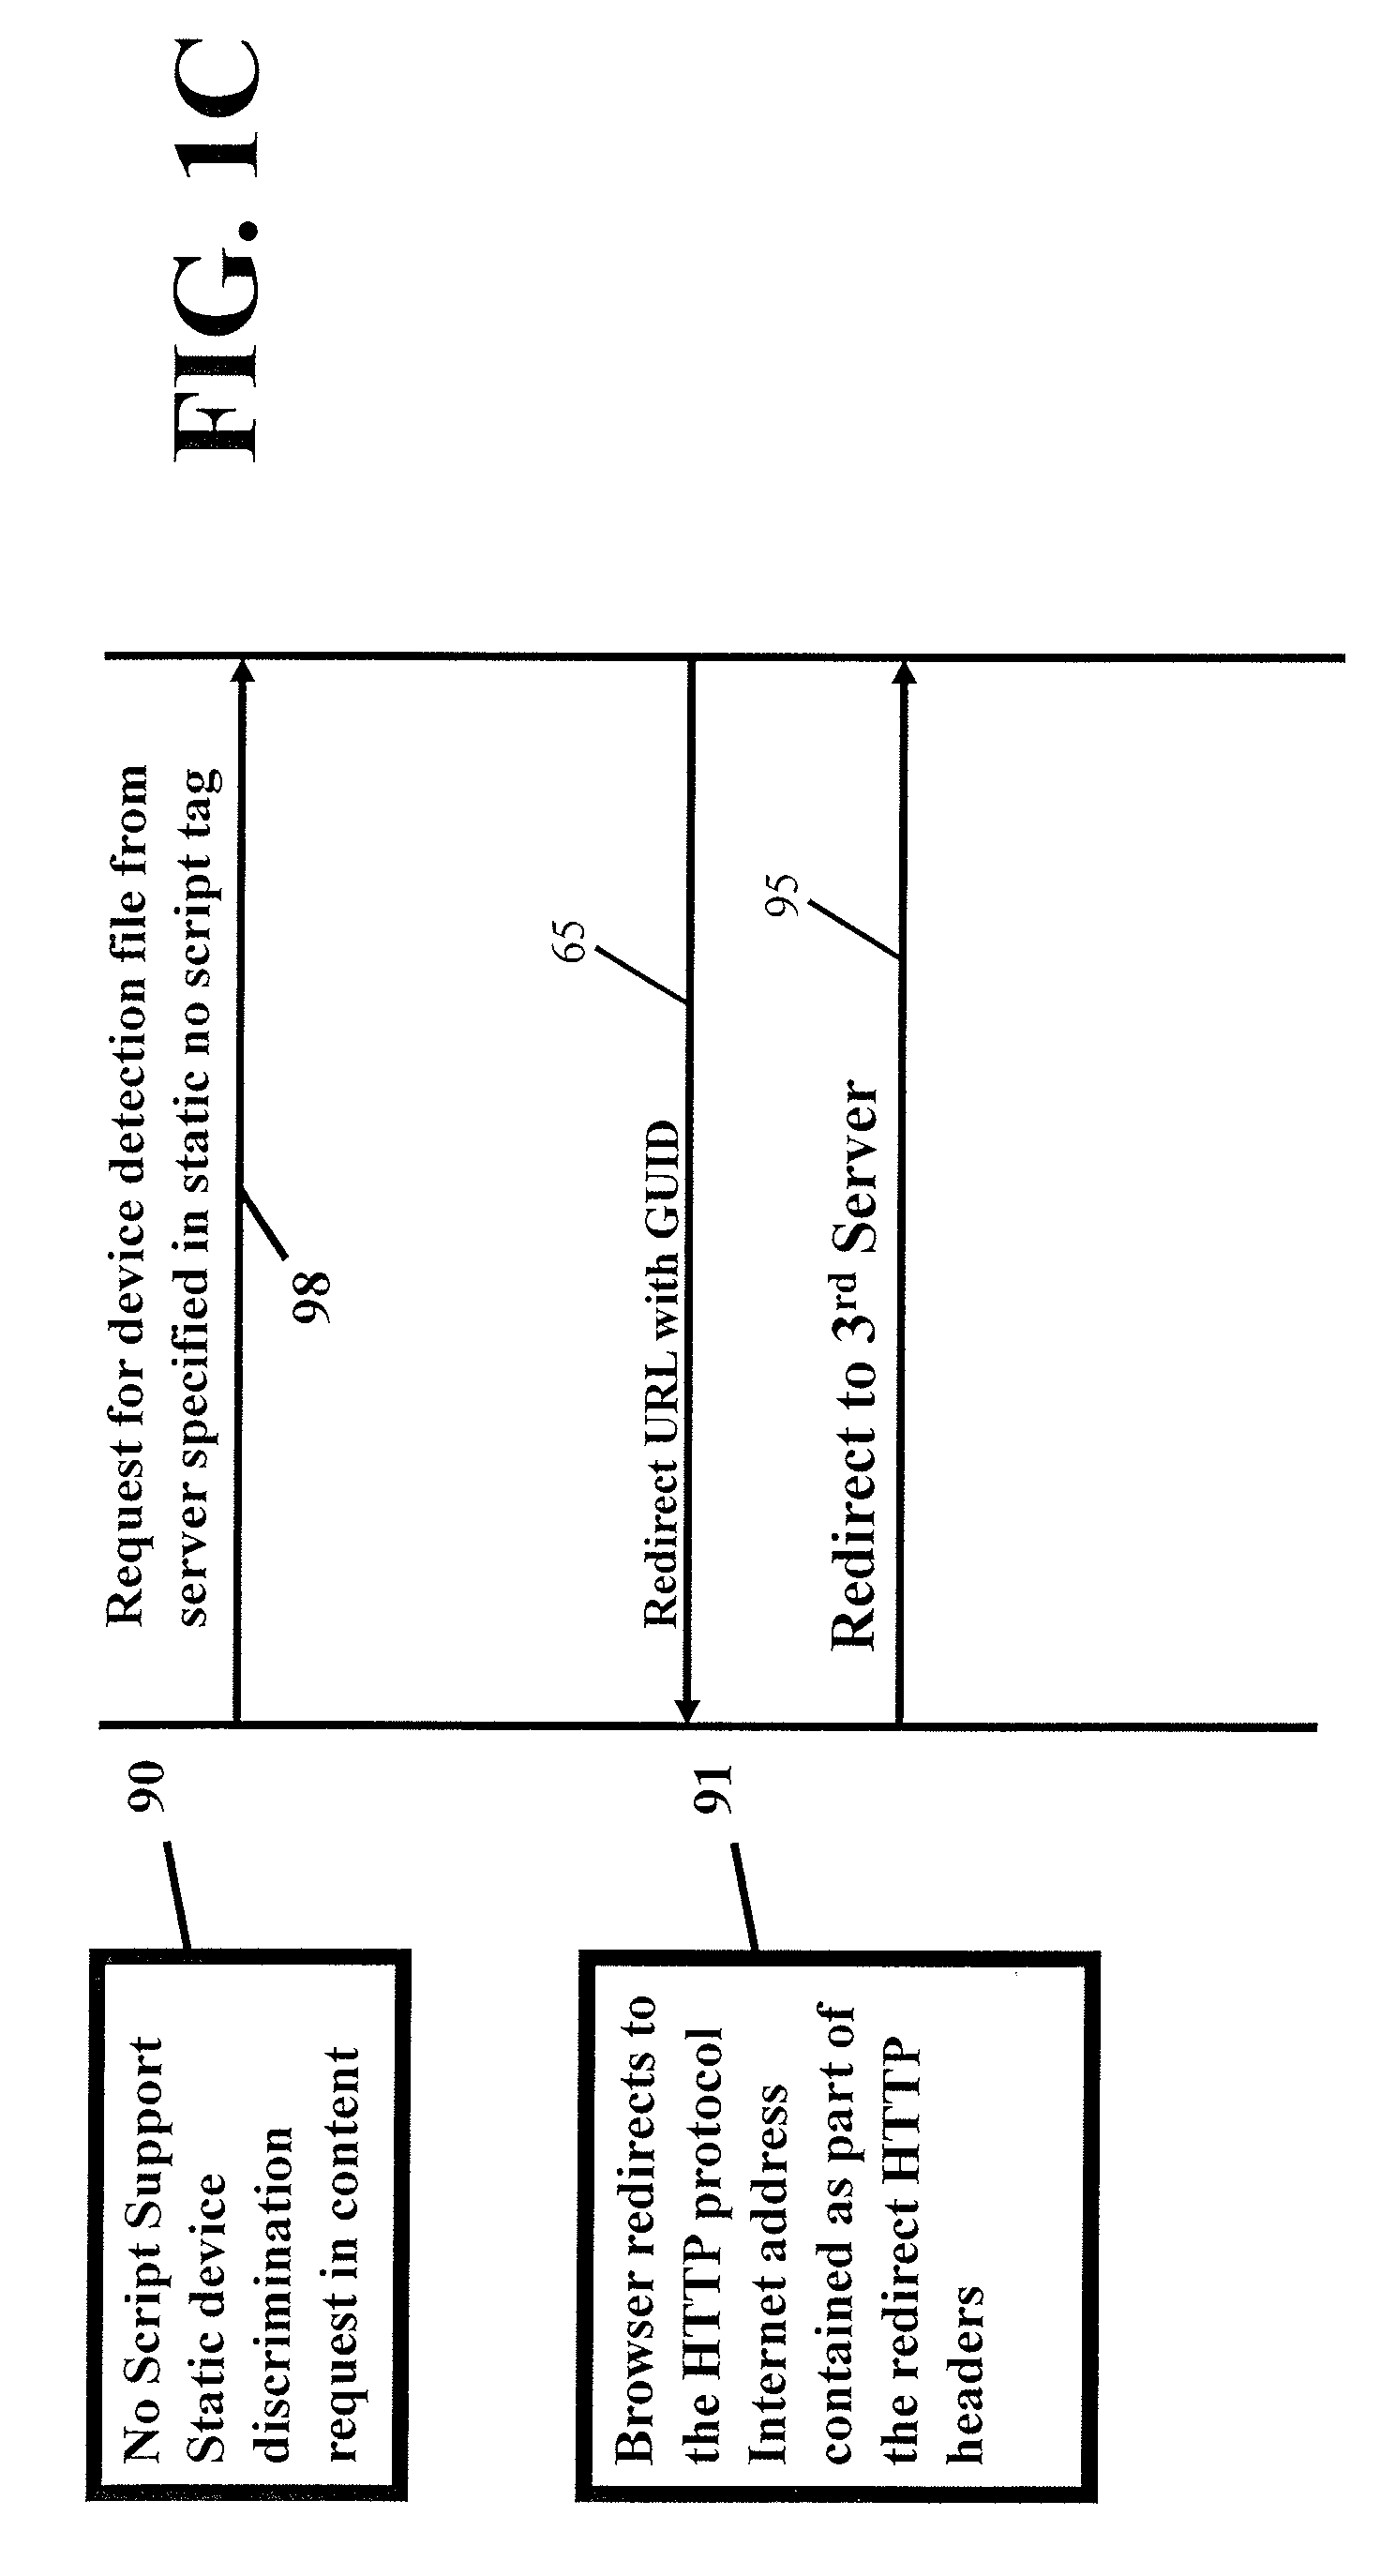 User-transparent system for uniquely identifying network-distributed devices without explicitly provided device or user identifying information